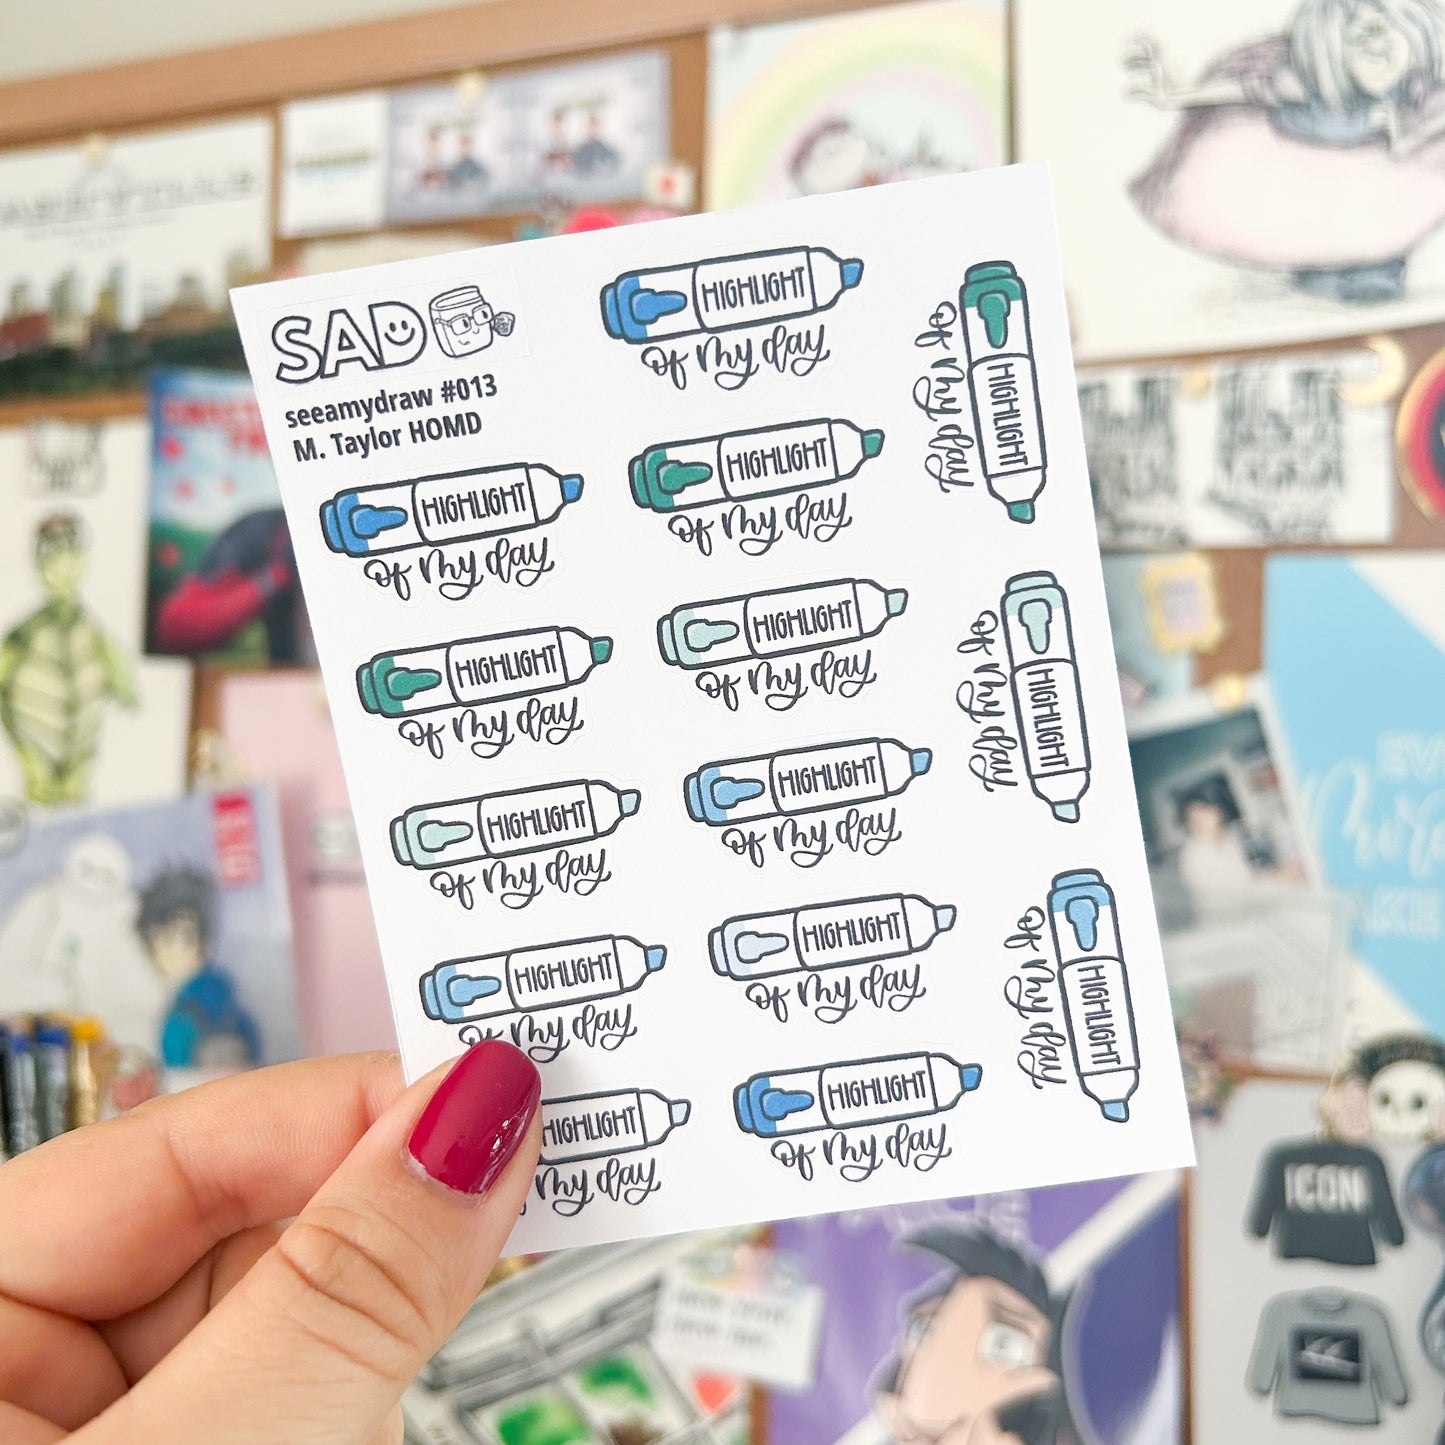 Highlight of My Day Stickers | 13 Color Palettes Available | Regular Matte or Clear Matte